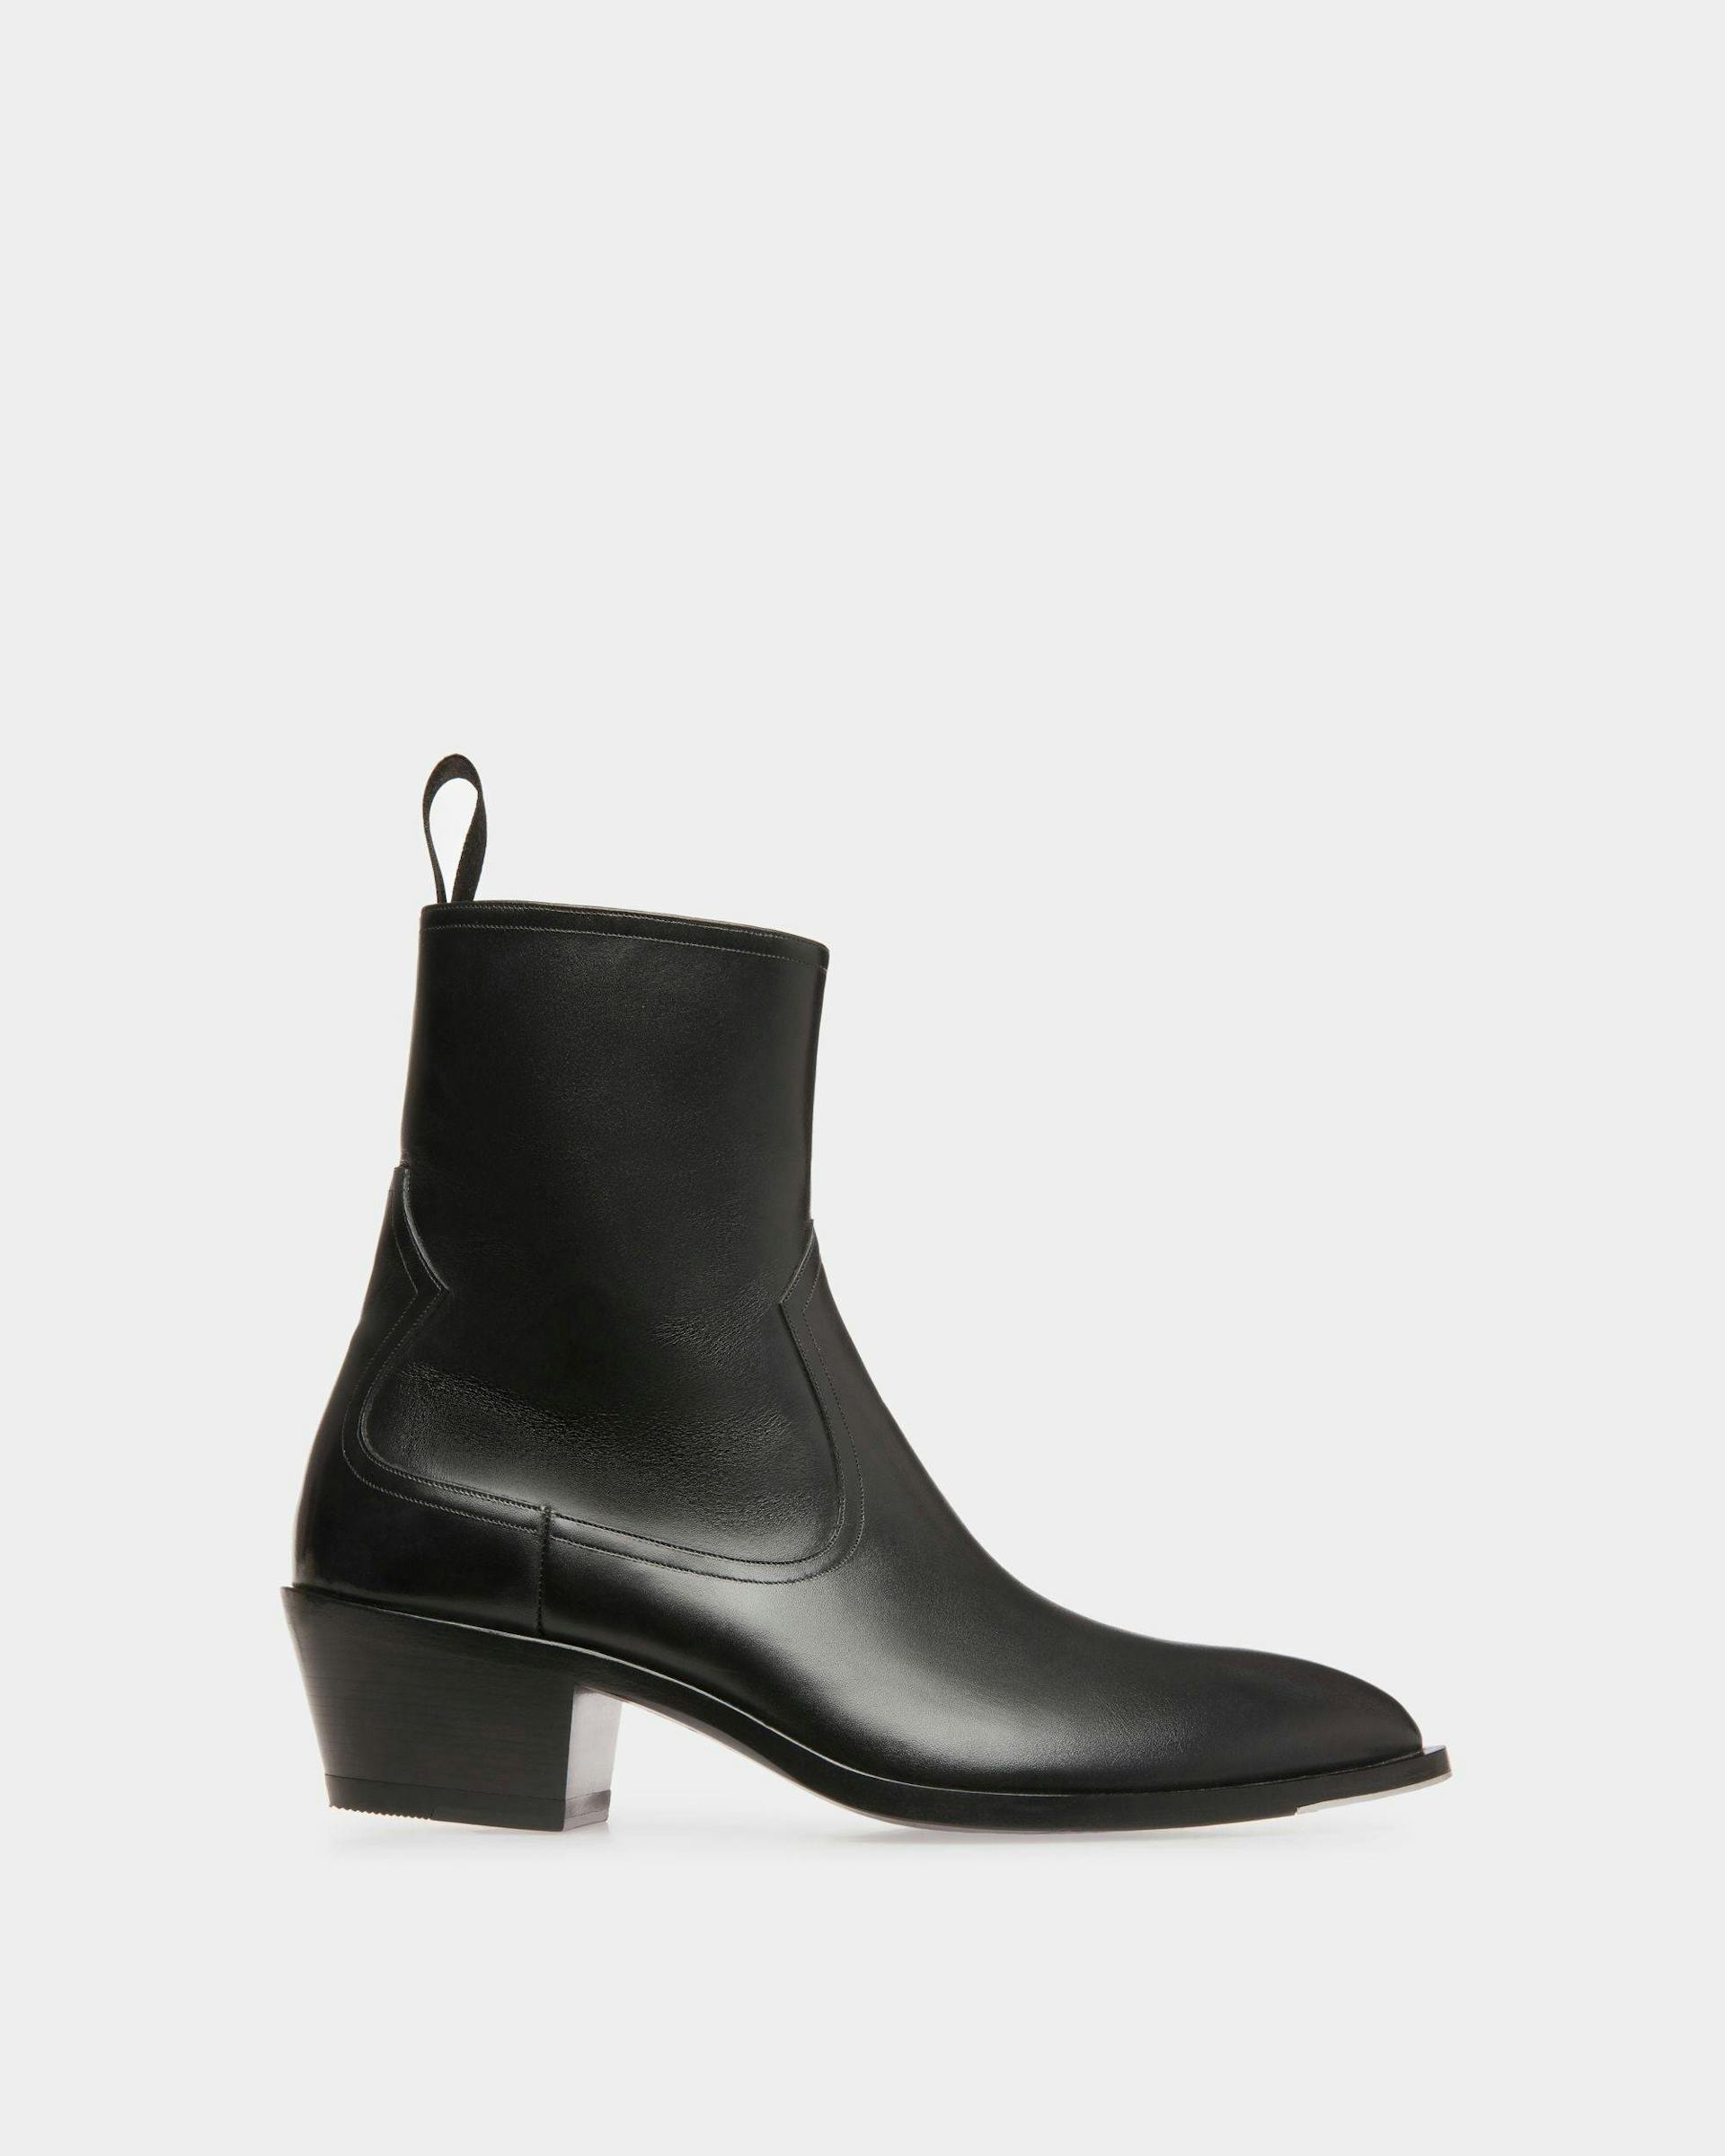 Vegas Boots In Black Leather - Women's - Bally - 01